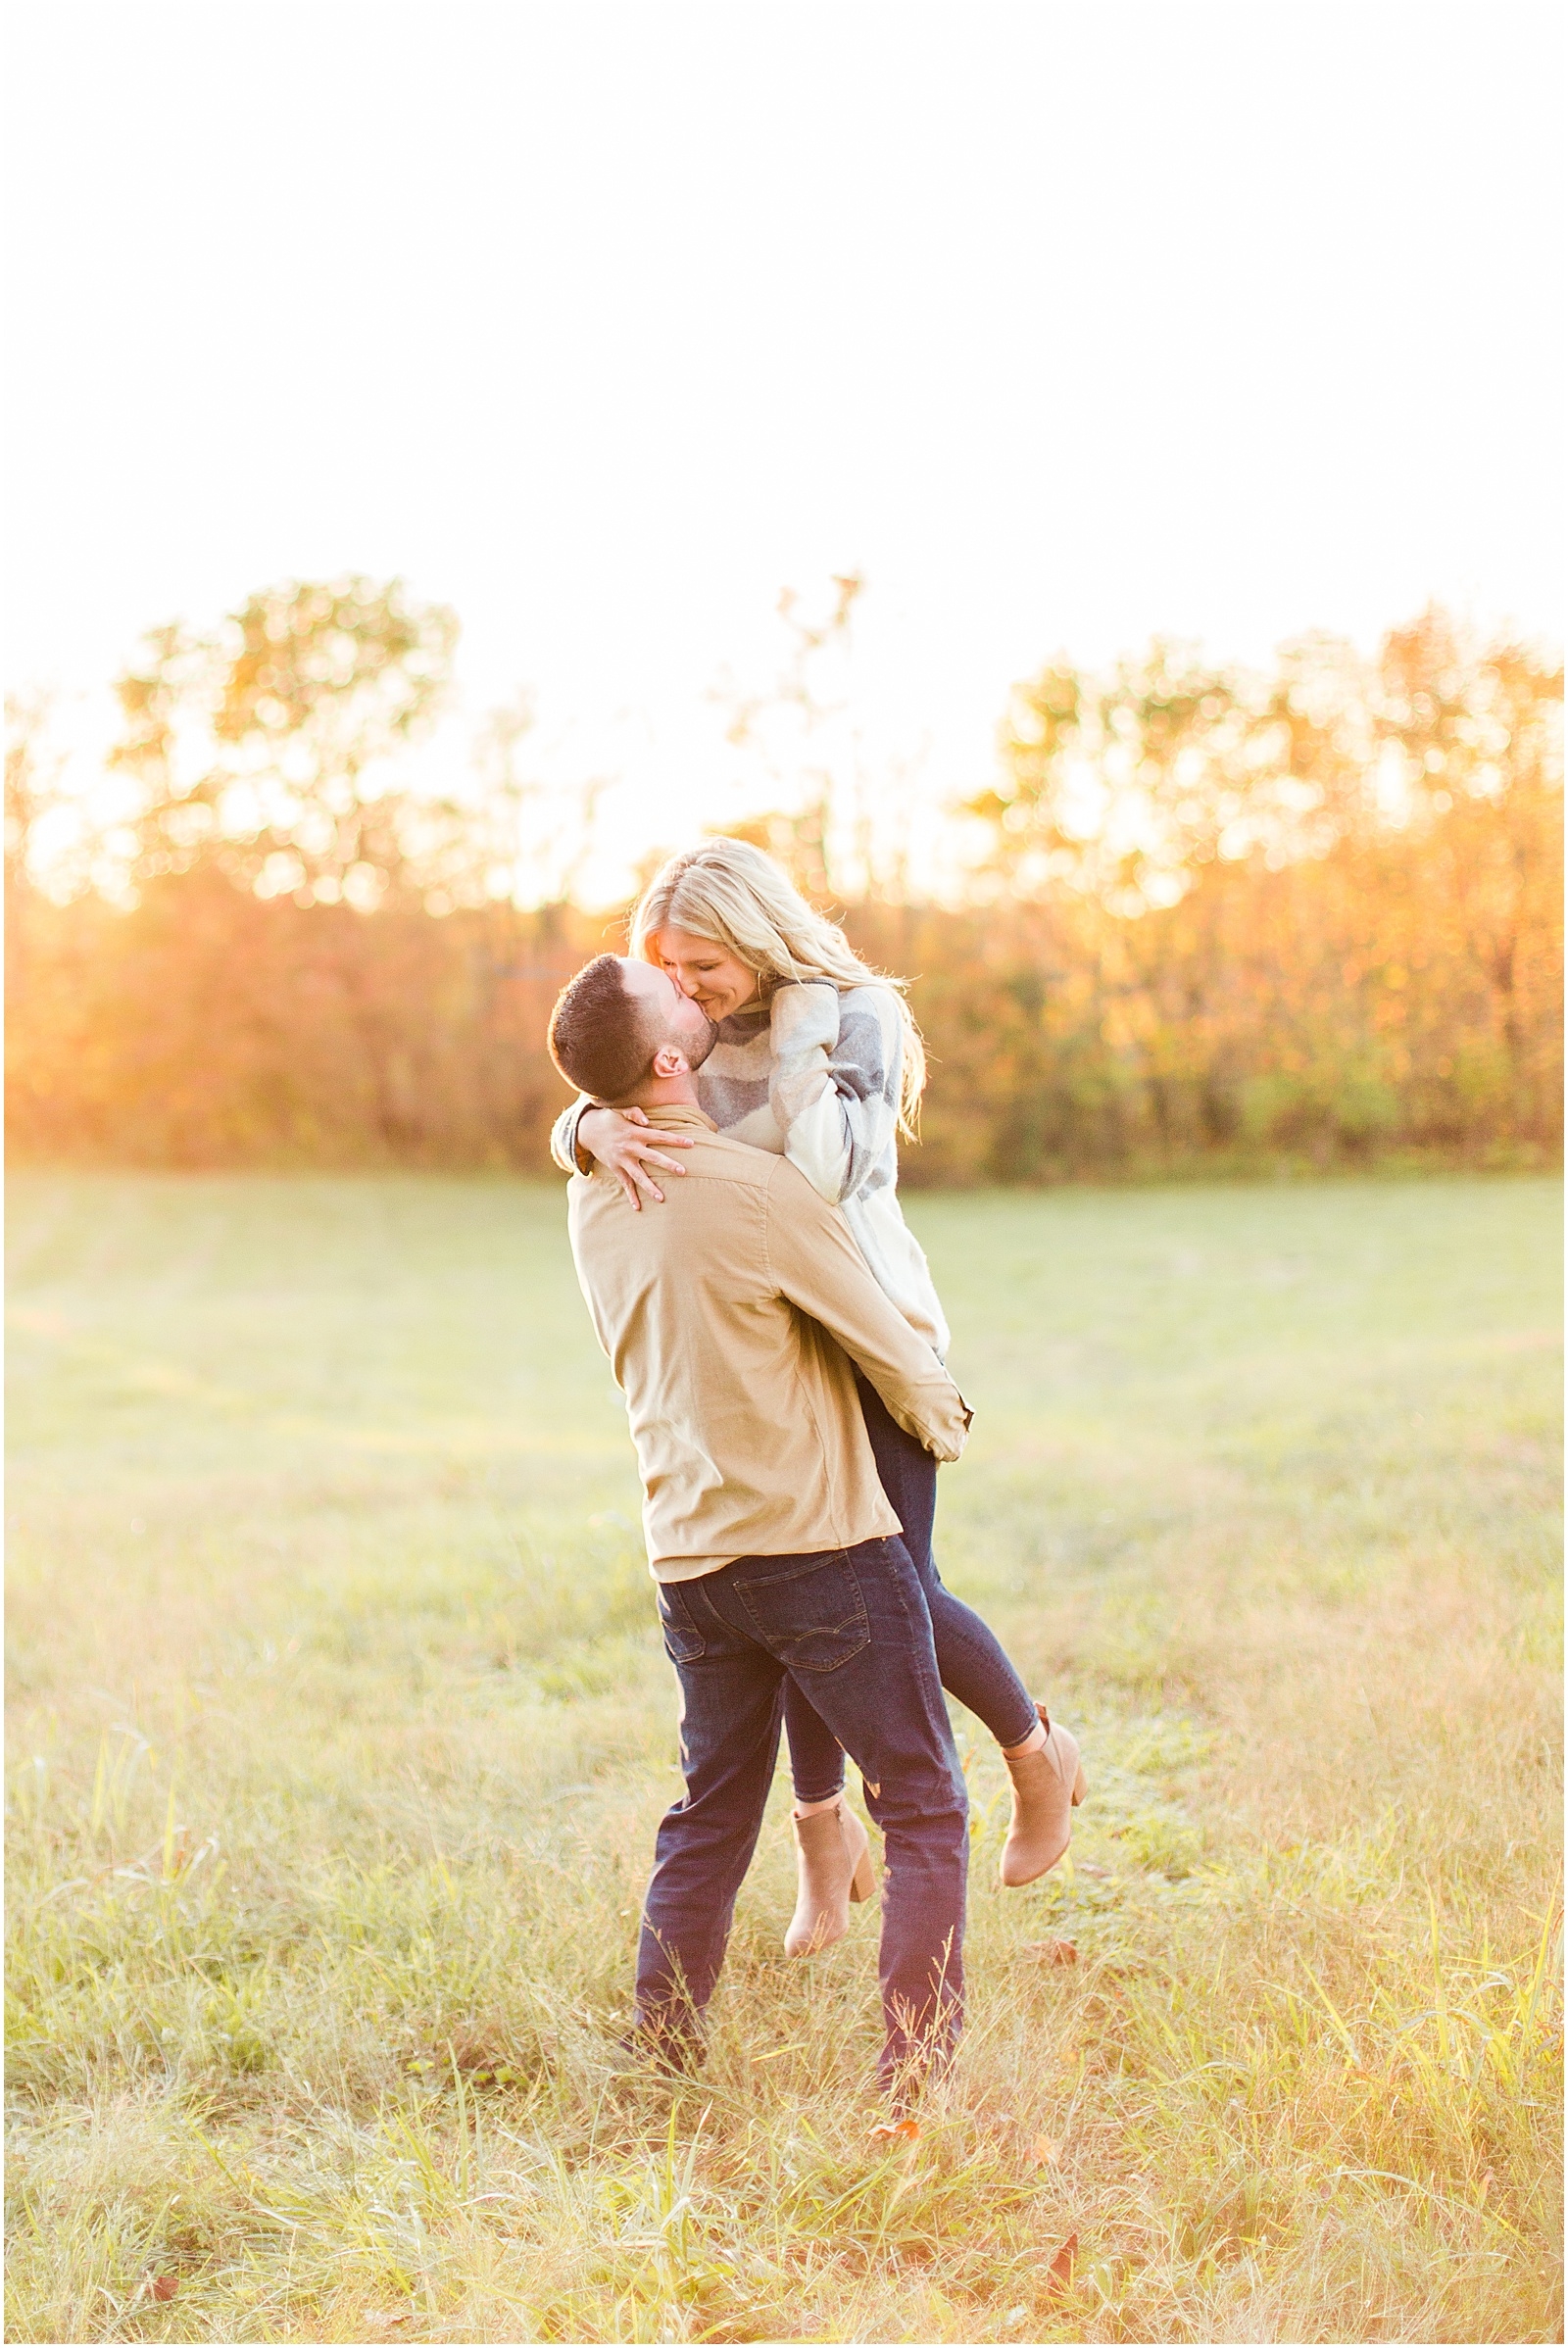 A Southern Indiana Engagement Session | Charleston and Erin | Bret and Brandie Photography041.jpg